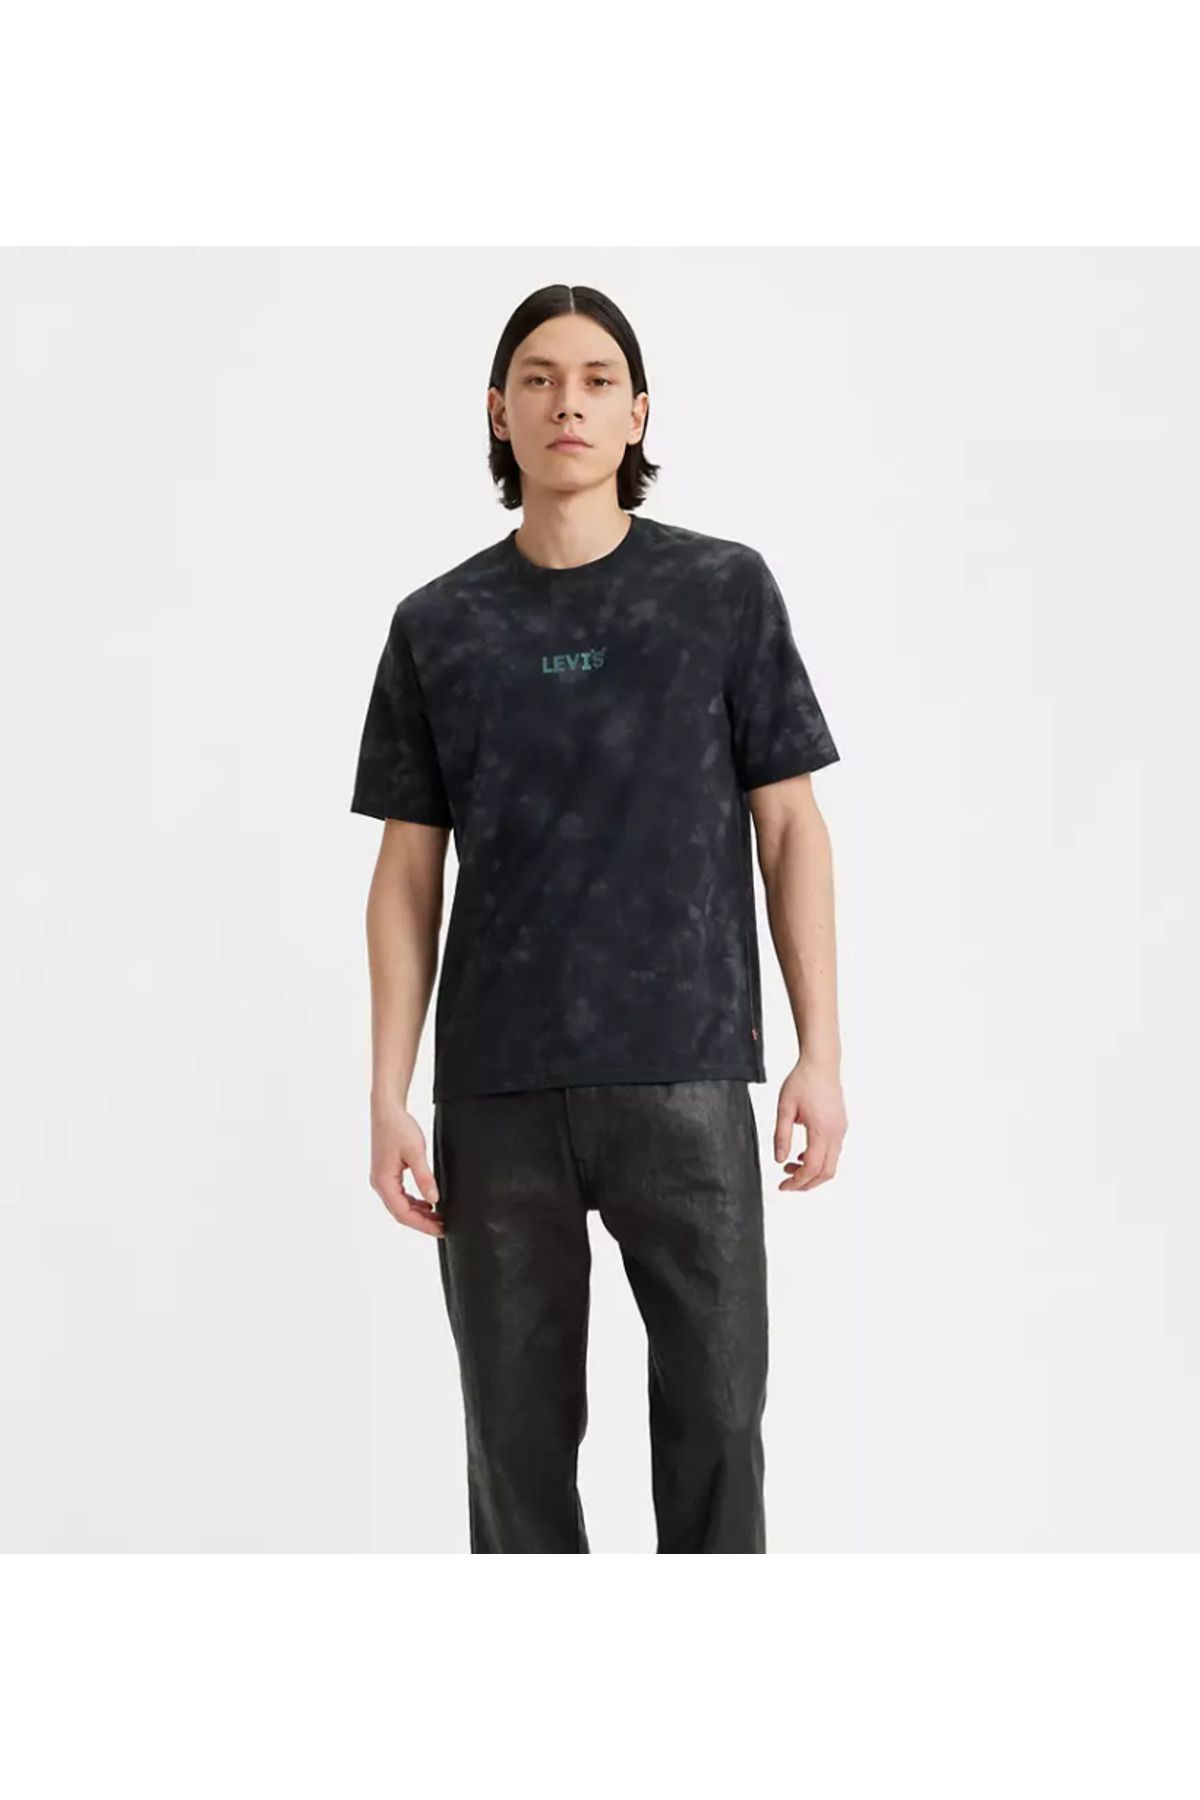 Levi's RELAXED FIT GRAPHIC TEE HEADLINE BLUE MIST GD